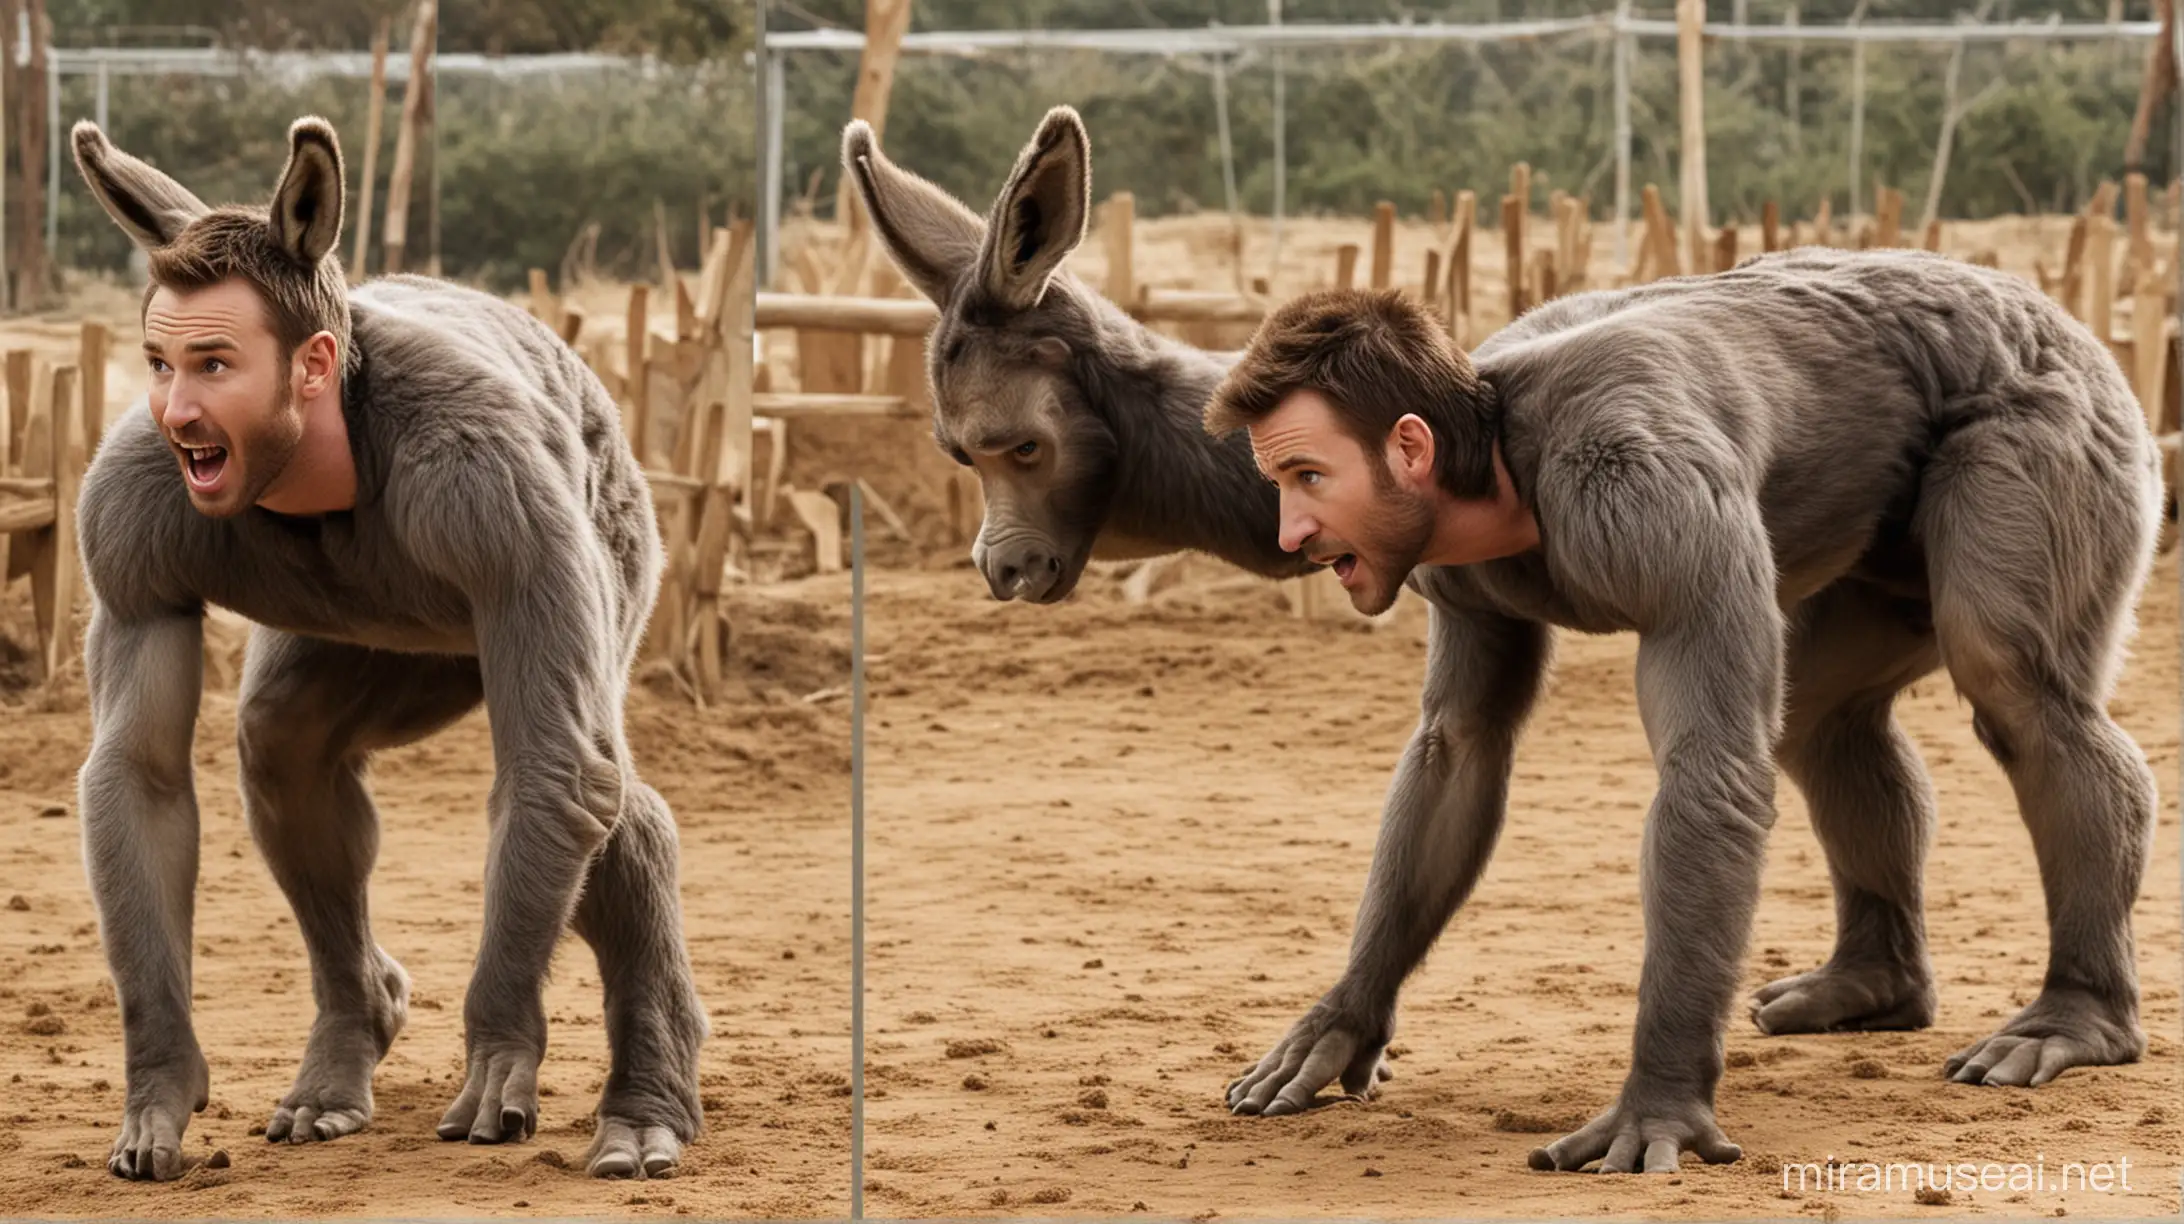 Chris Evans on all fours transforming into a donkey. He has donkey ears. He has donkey legs. He has donkey hooves. He has a donkey tail. He has a complete donkey body. And he's braying like a donkey. But his head is human.